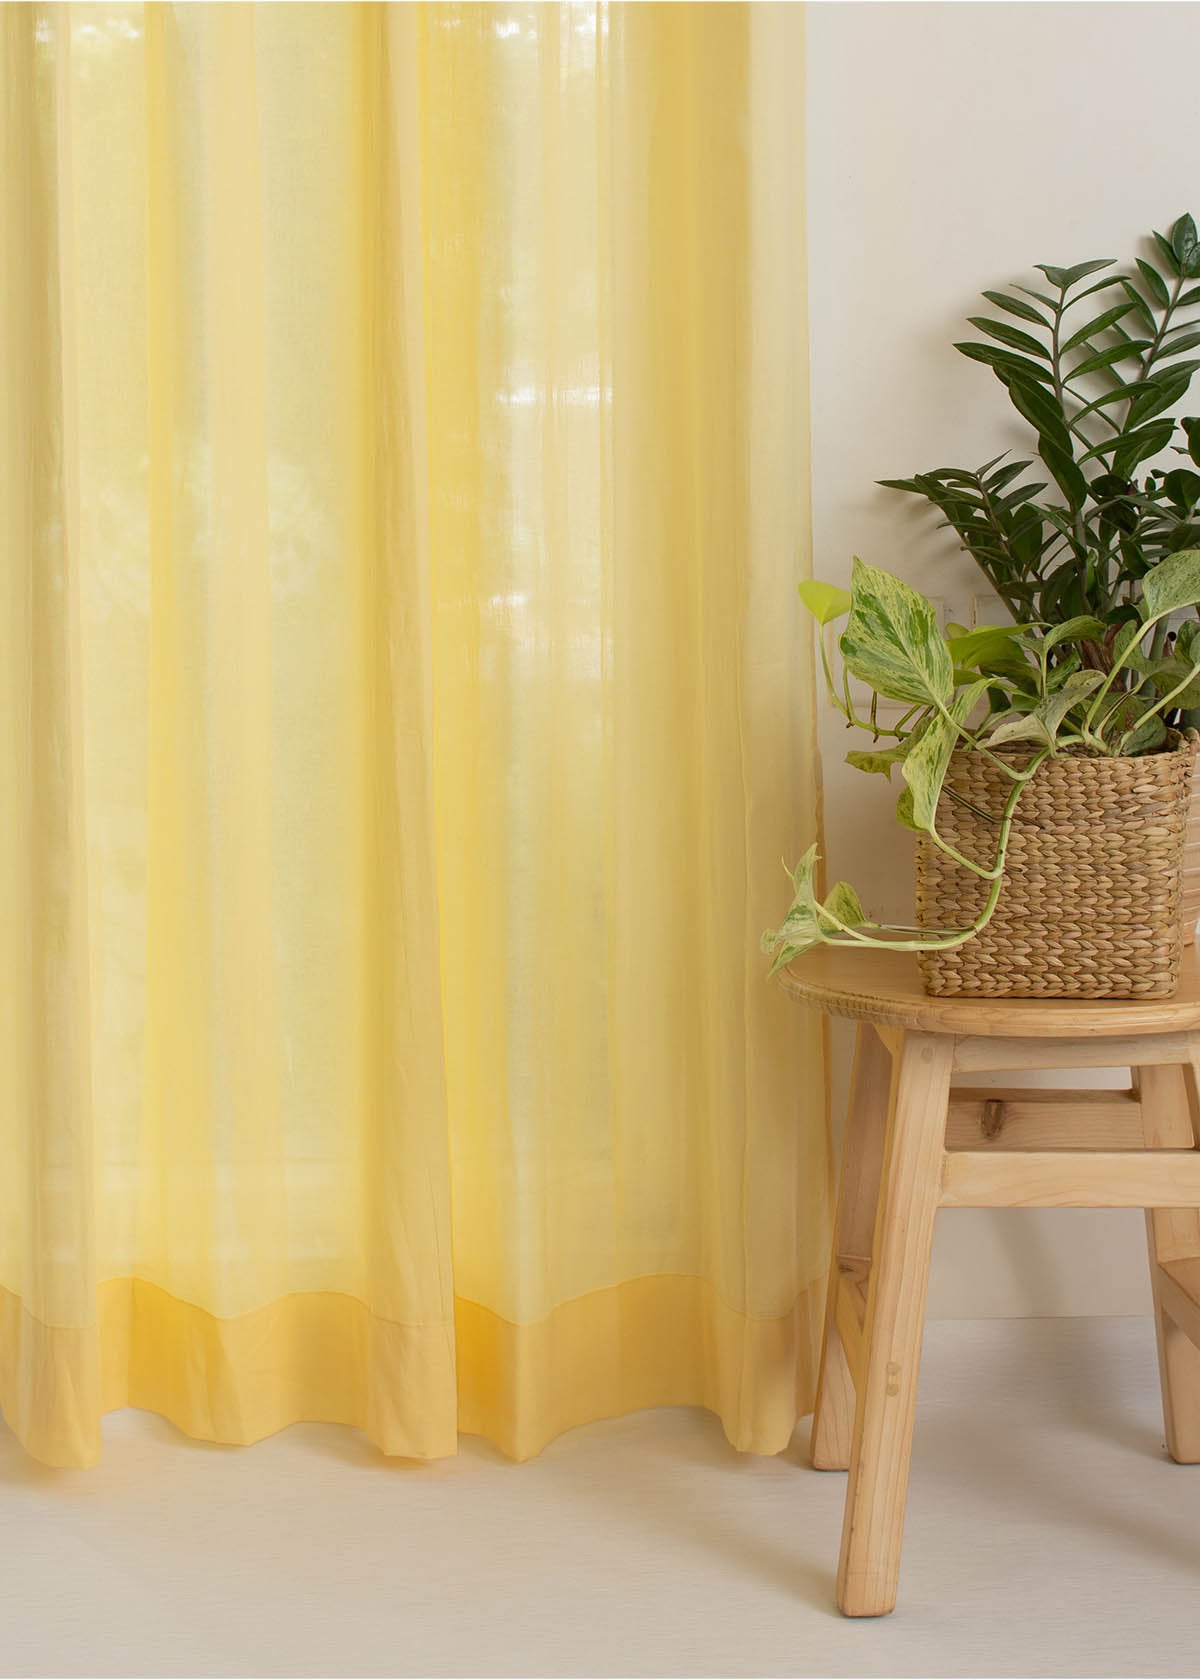 Solid Turmeric yellow sheer 100% Customizable Cotton plain curtain for Living room & bedroom - Light filtering